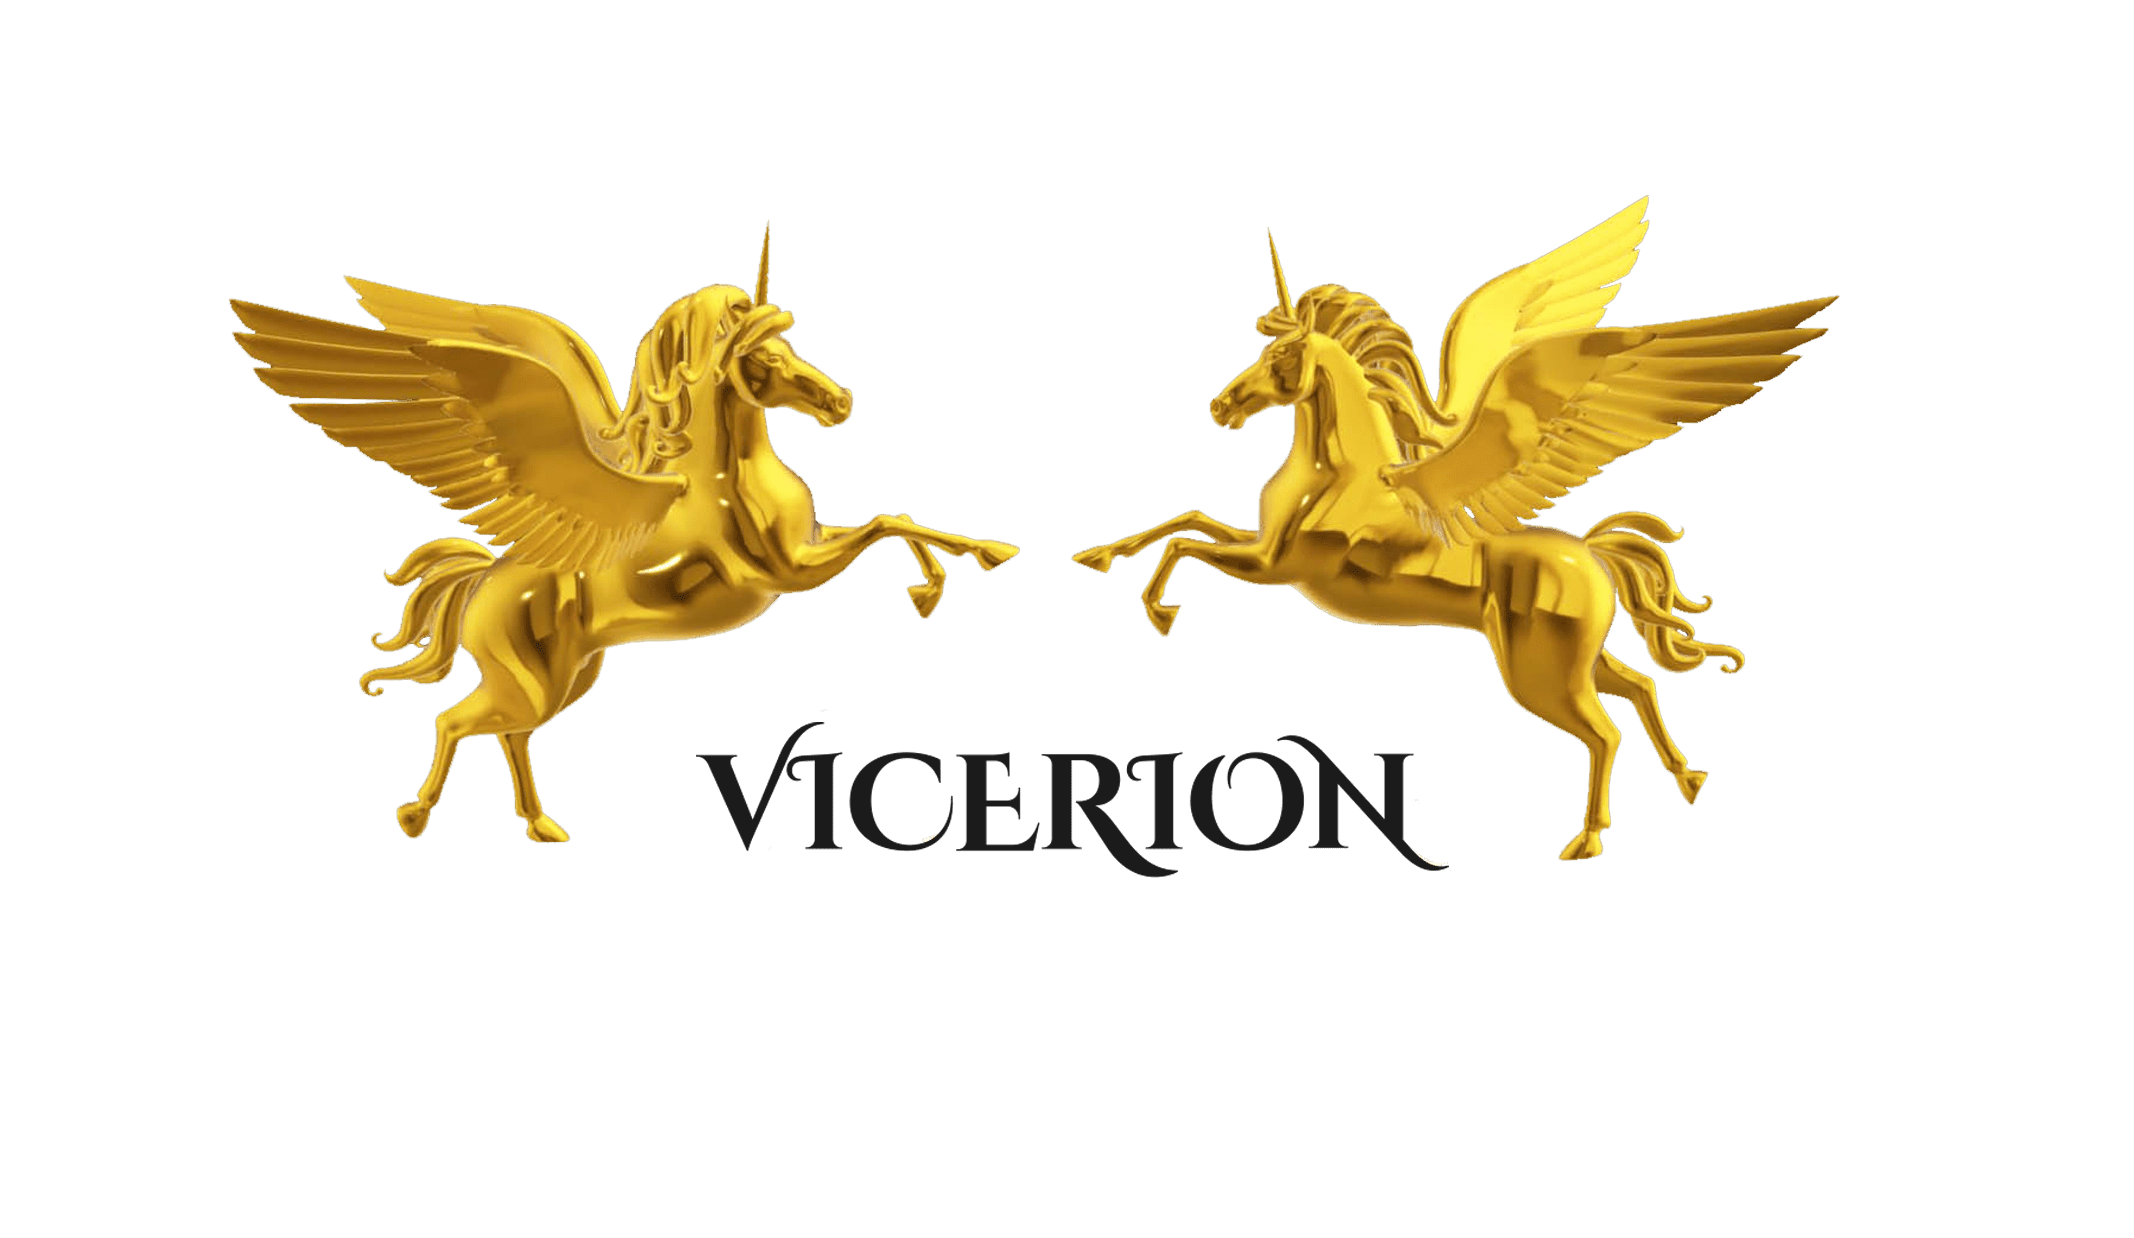 VICERION